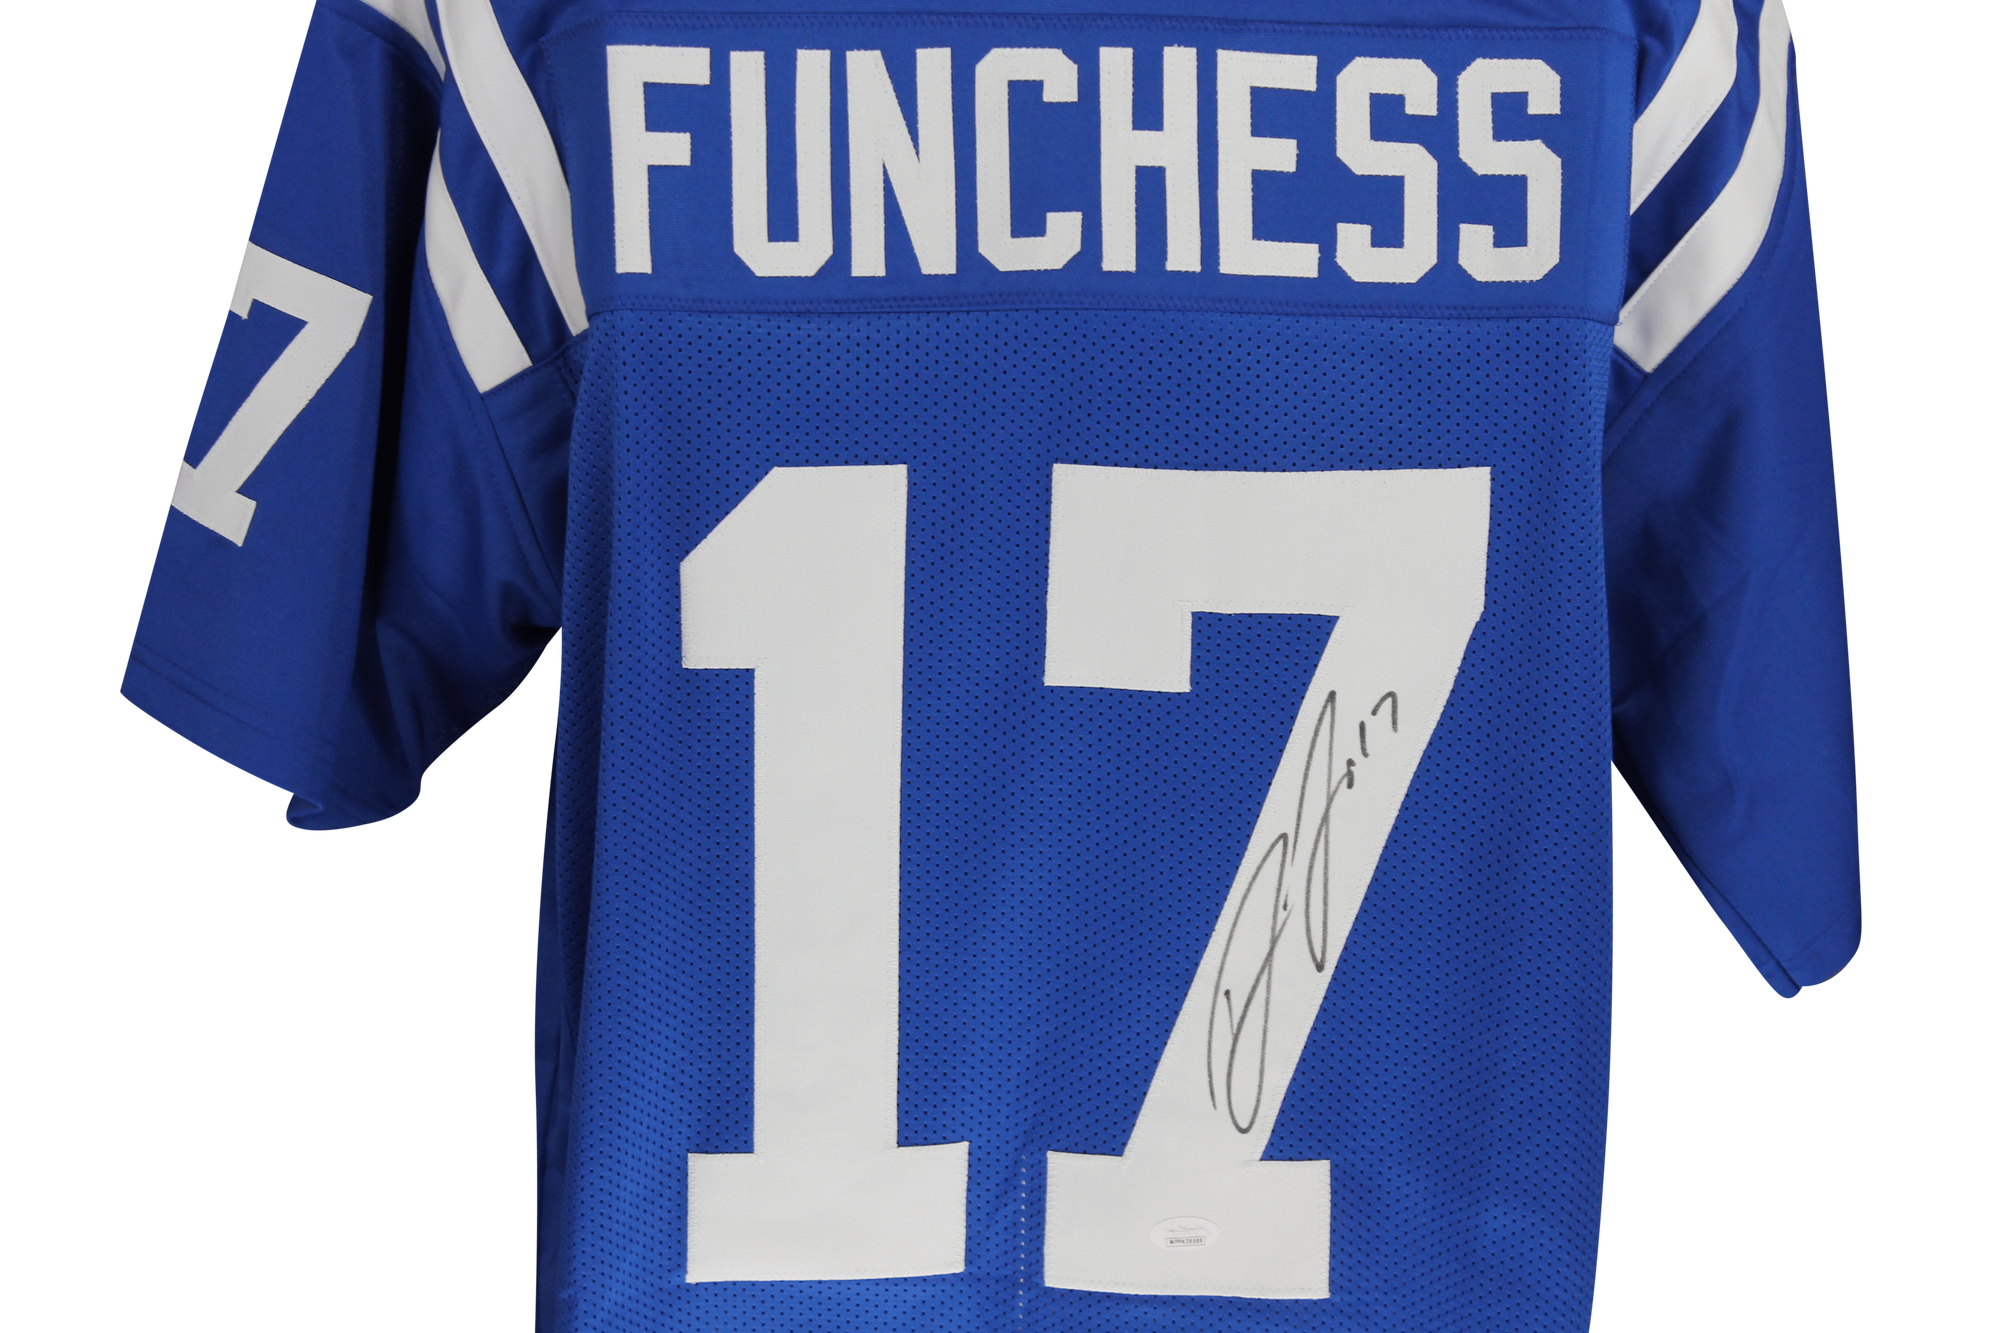 devin funchess colts jersey